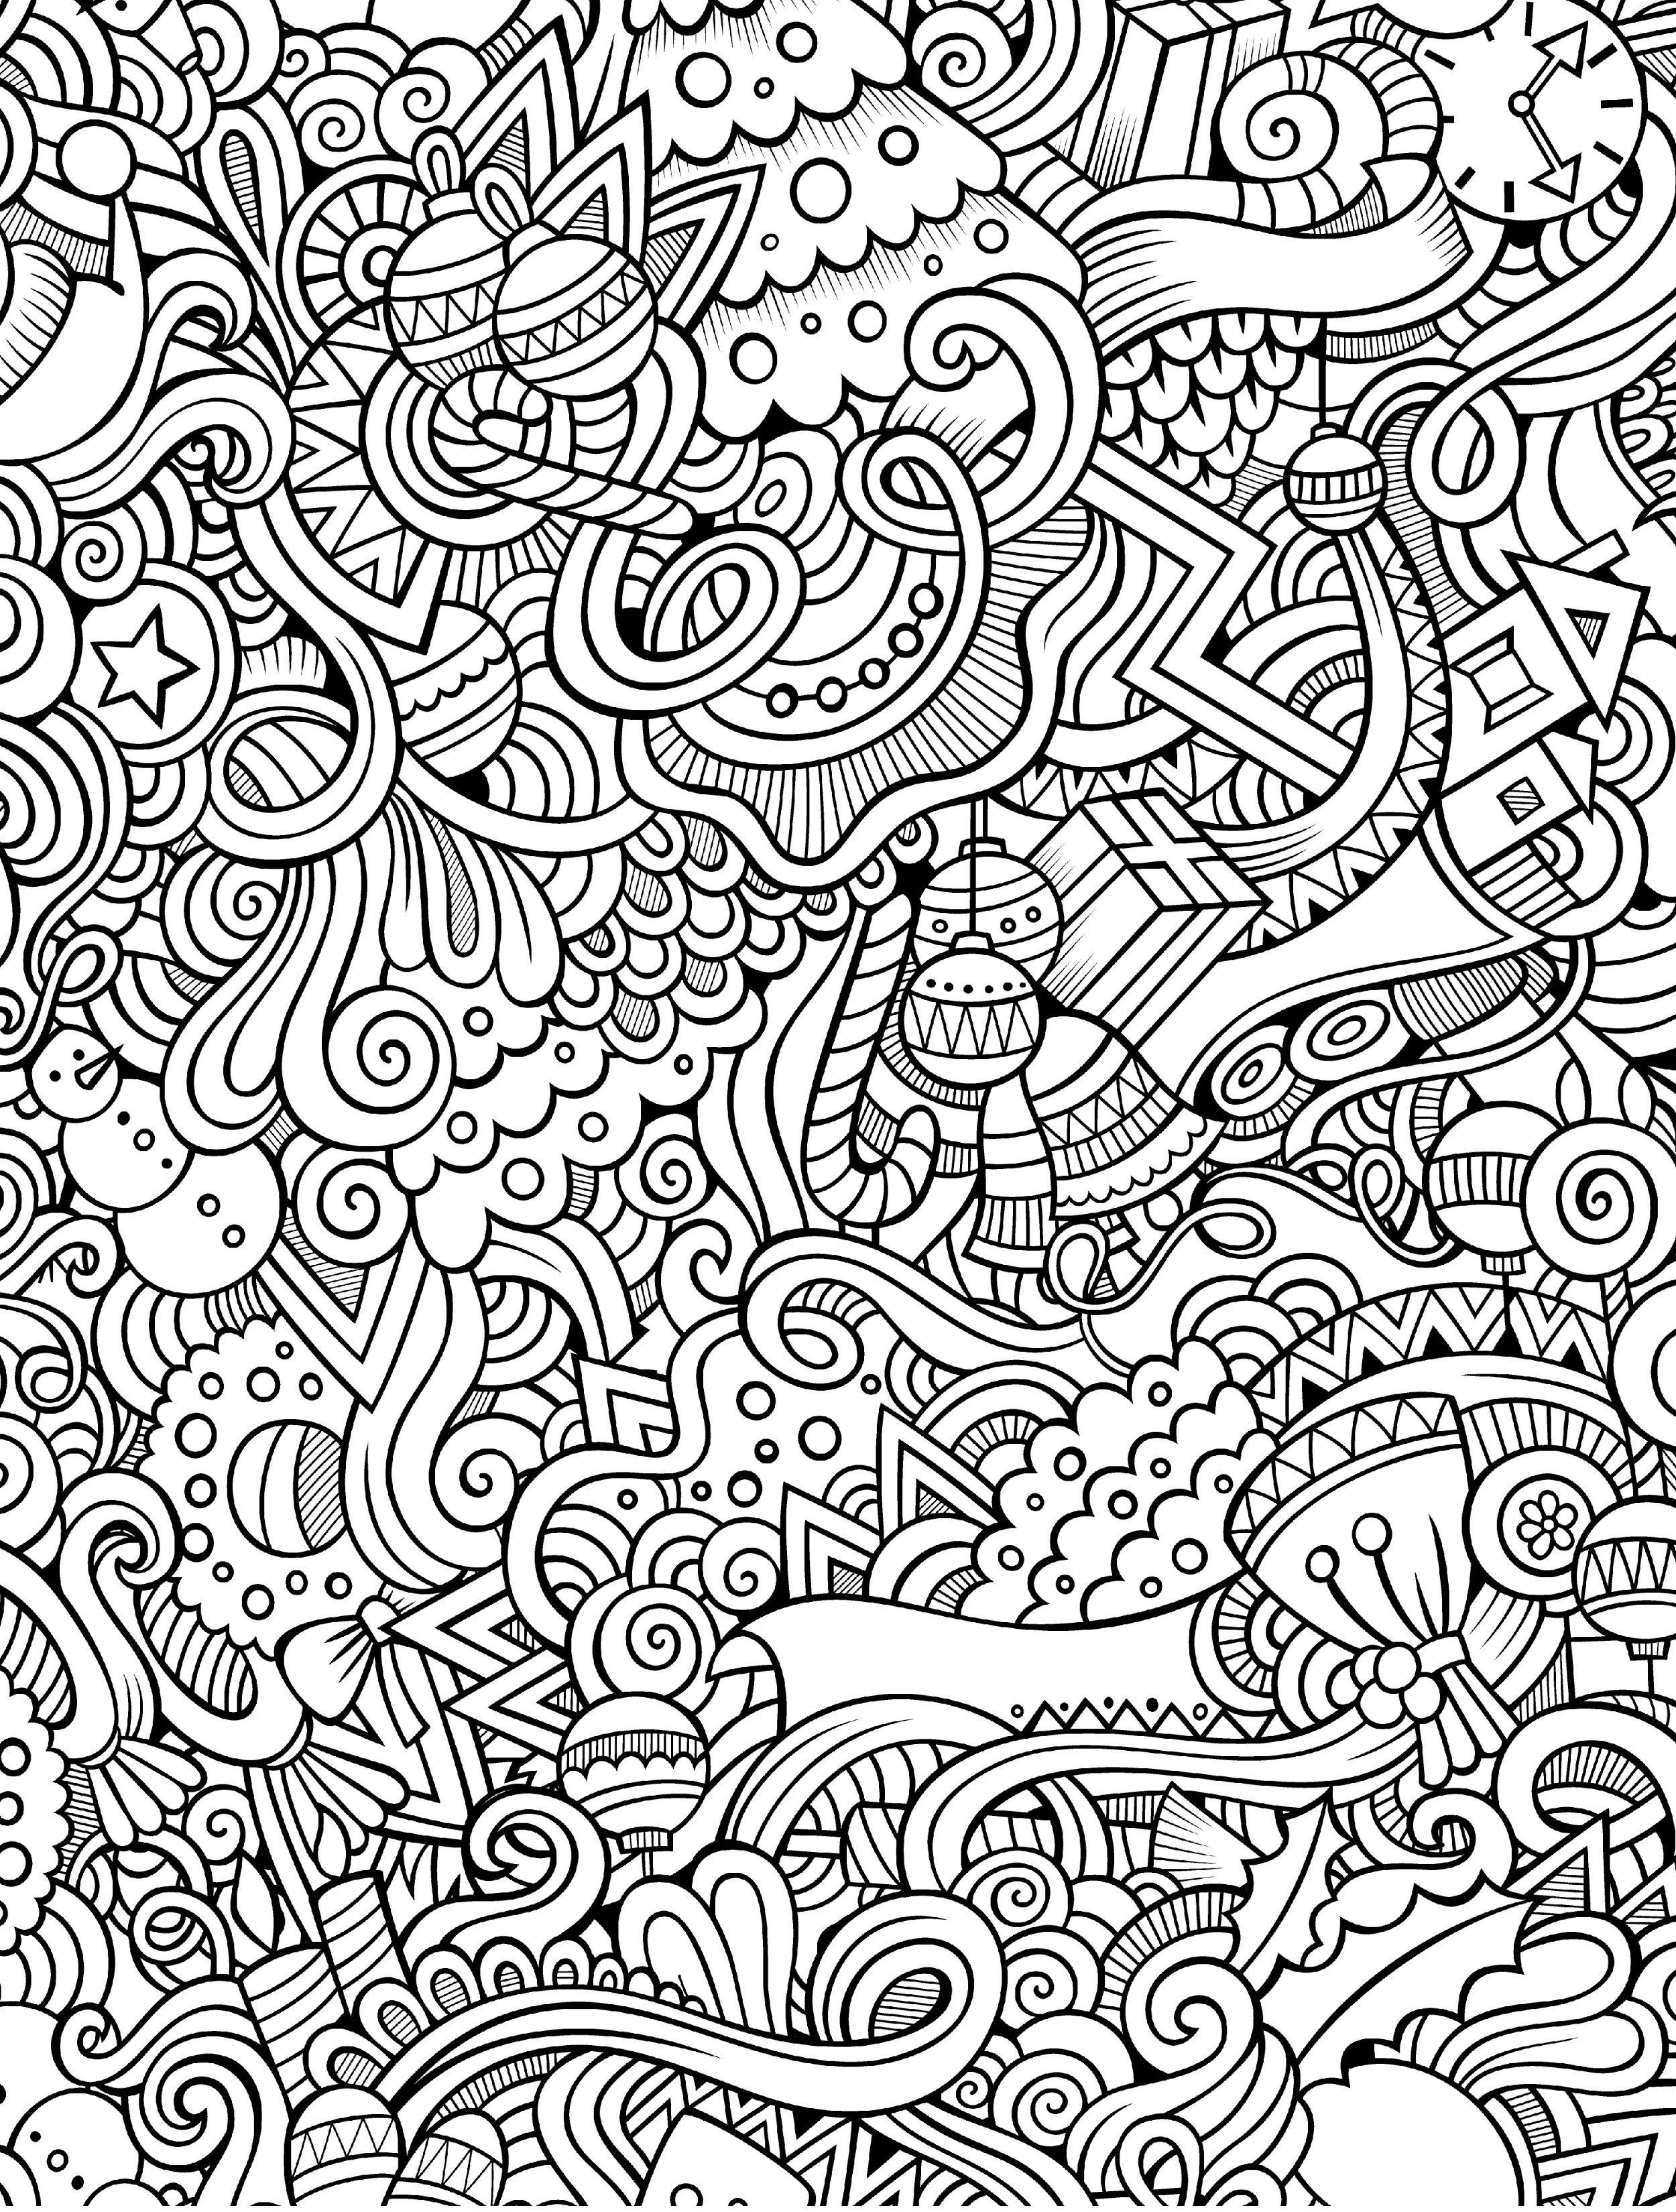 10 Free Printable Holiday Adult Coloring Pages | Coloring Pages - Free Printable Holiday Coloring Pages